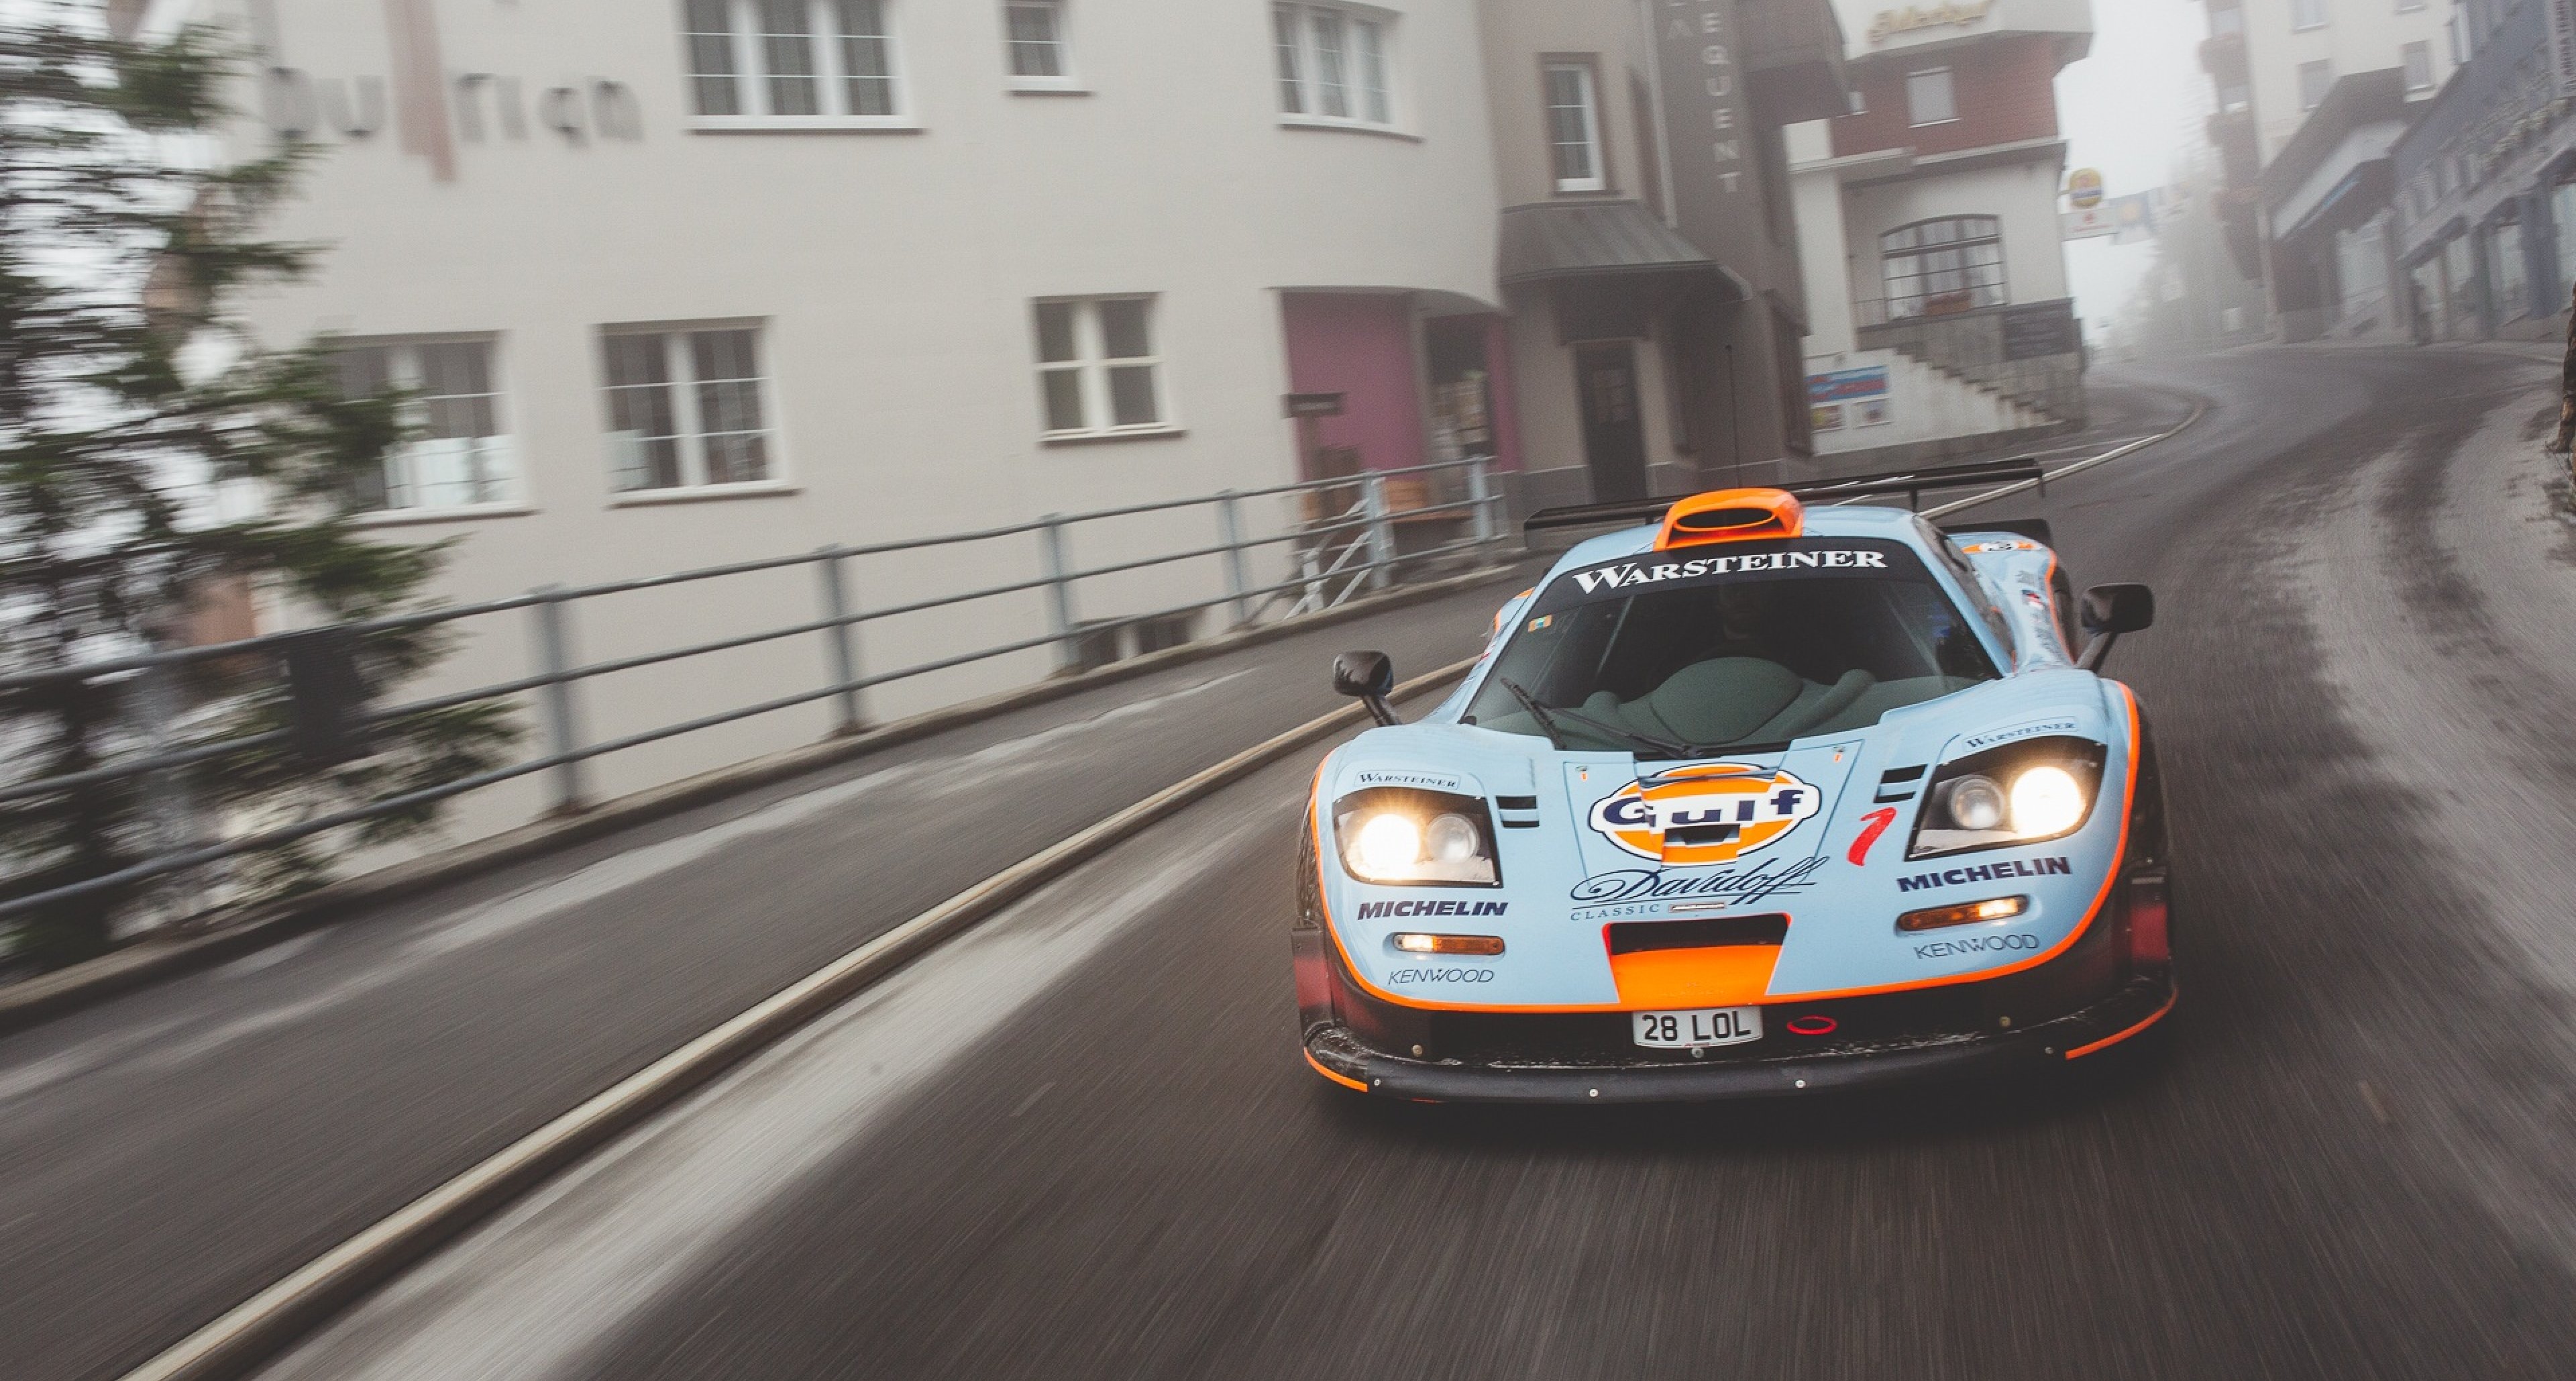 Storming The Swiss Alps With A Mclaren F1 Gtr Longtail